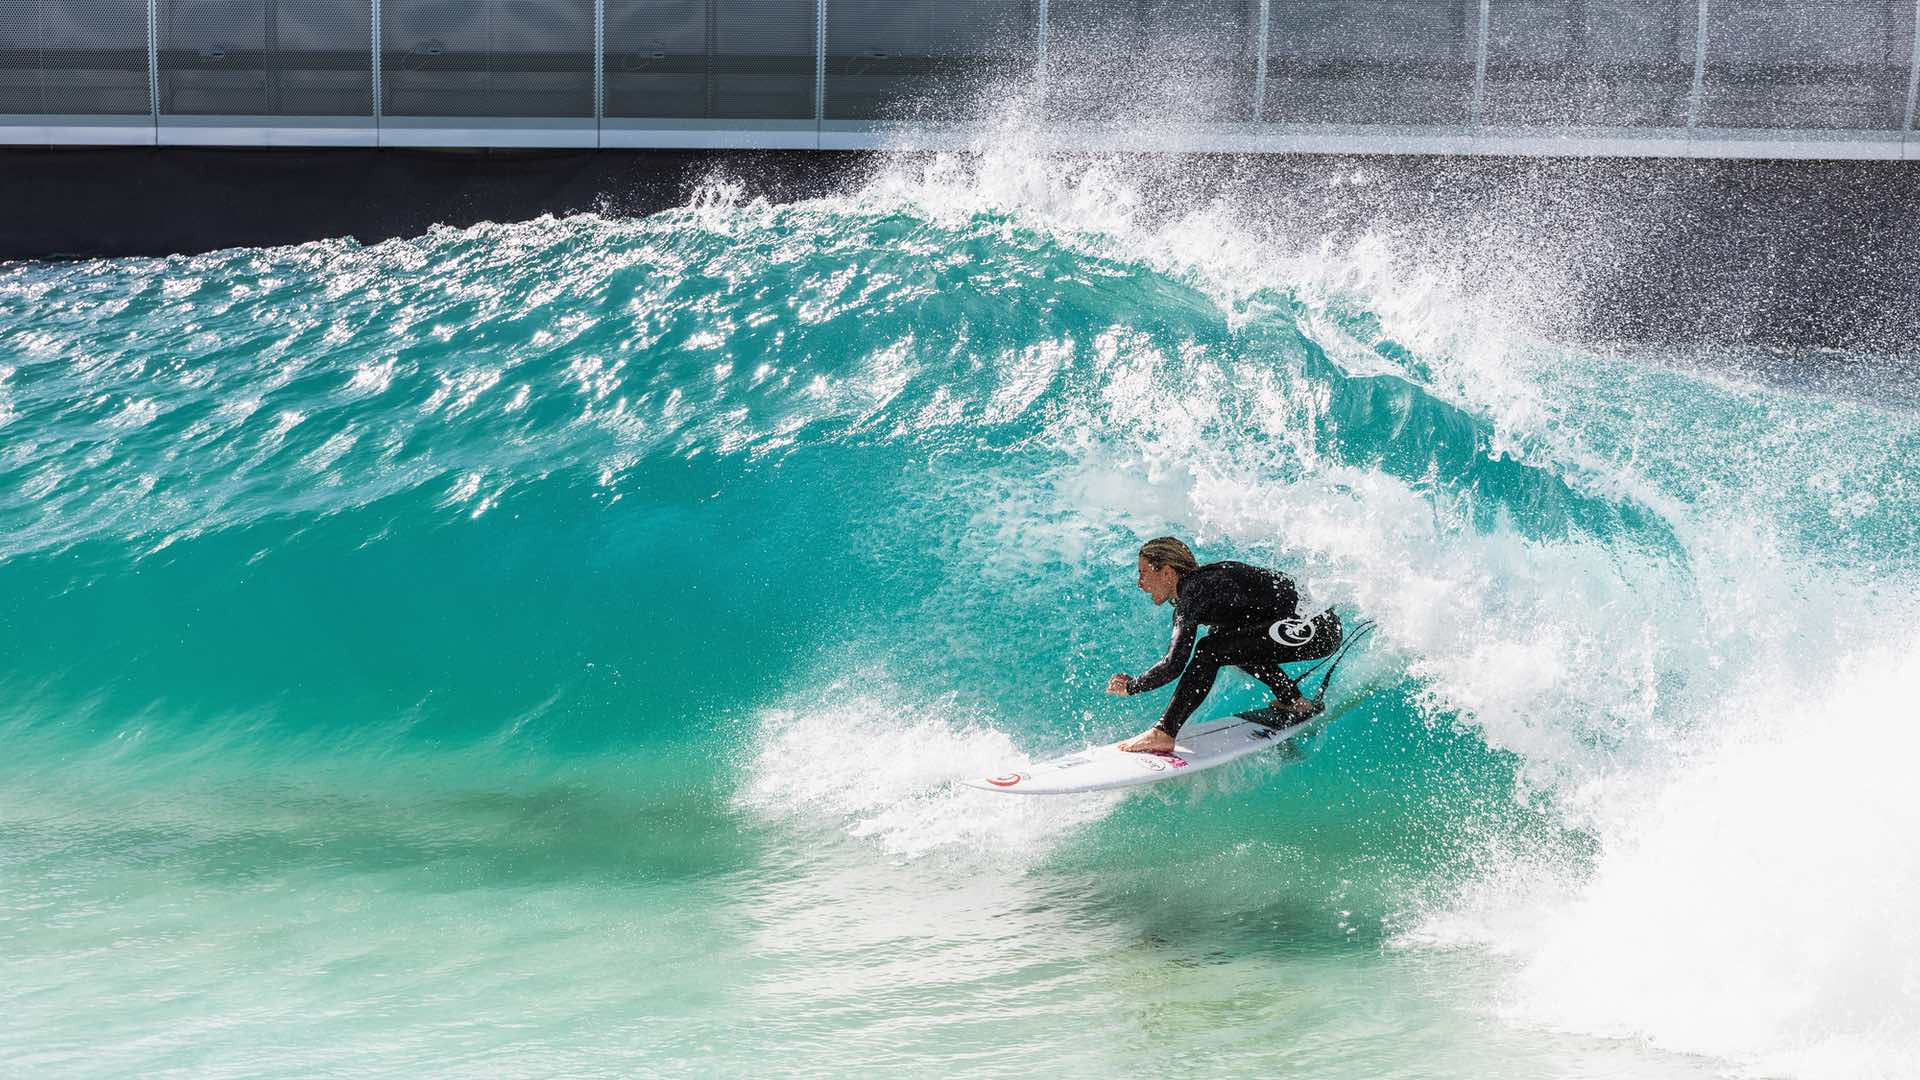 Melbourne's Long-Awaited Surf Park Urbnsurf Is Finally Pumping Out Waves